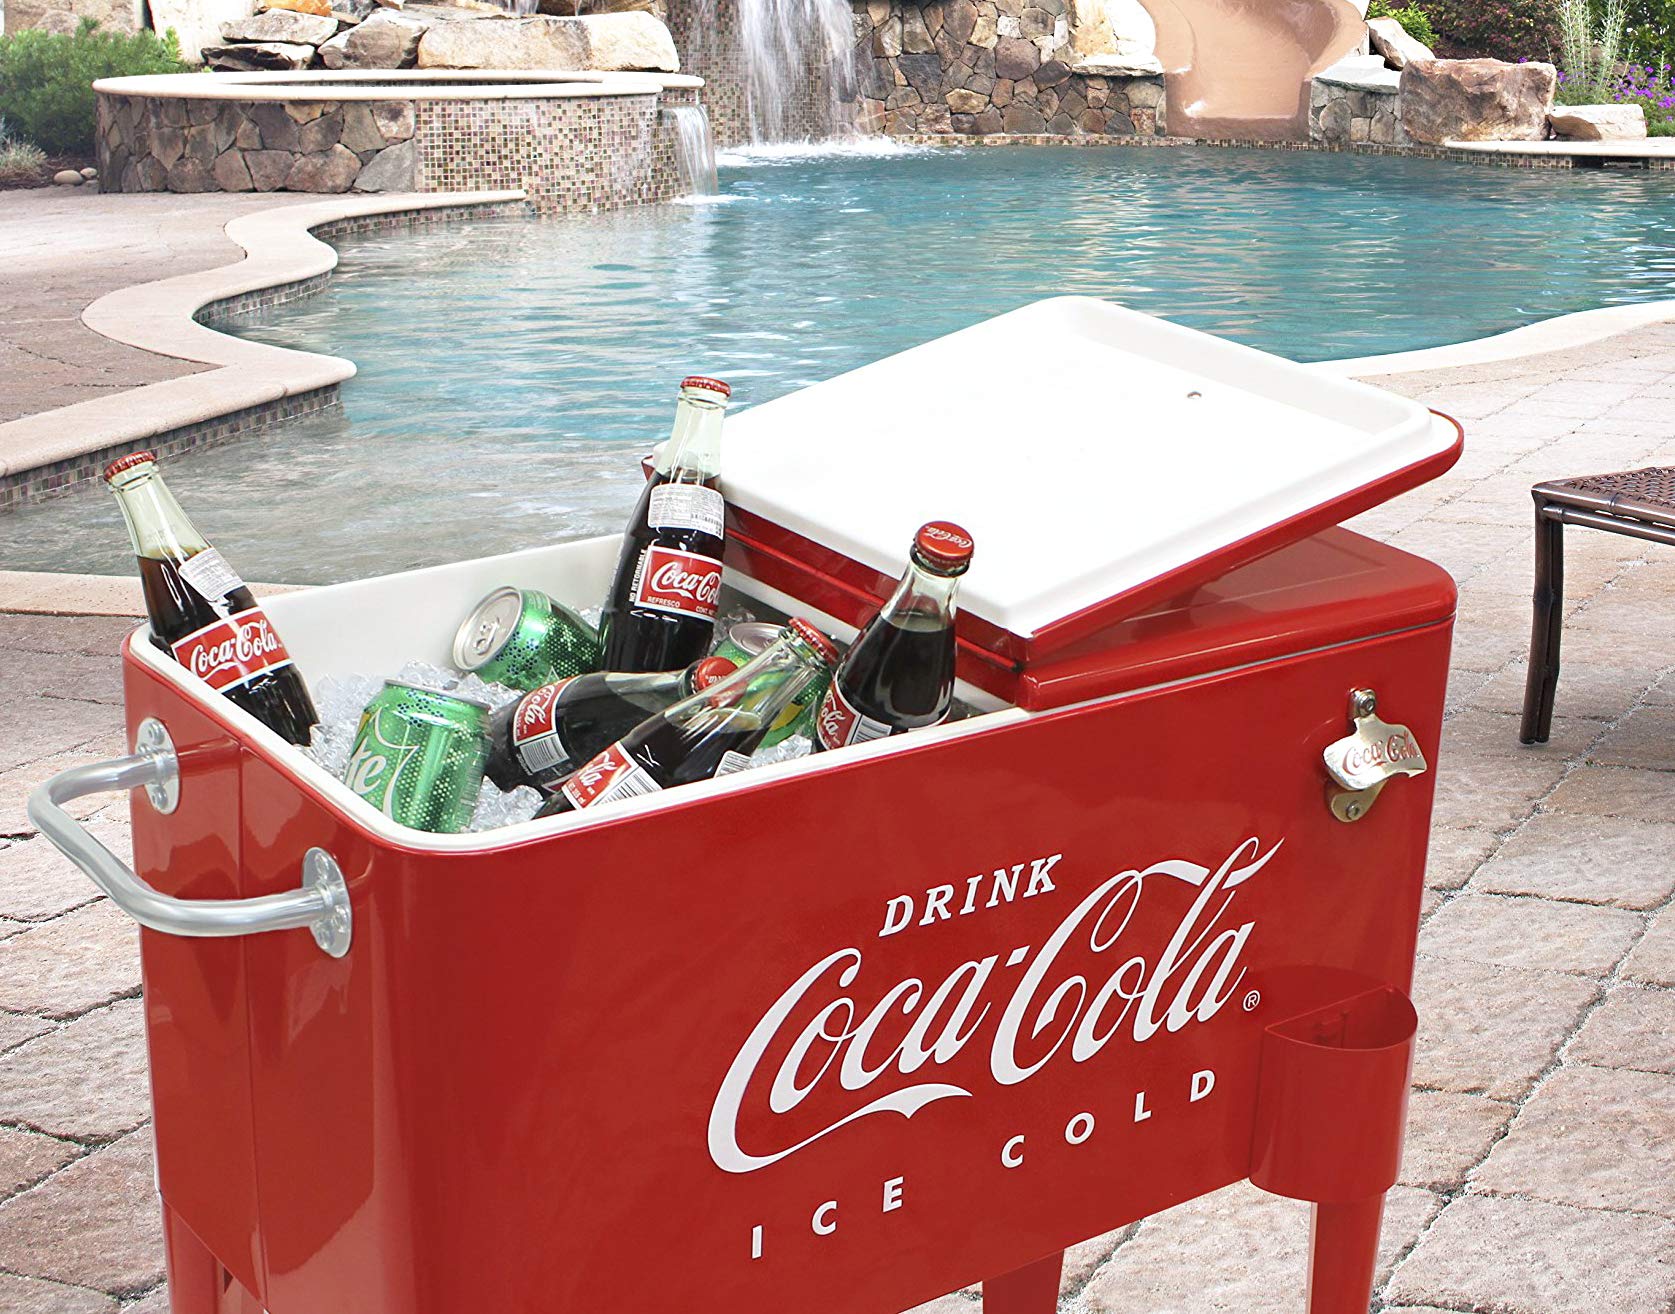 Leigh Country CP 98105 60 Qt Coca-Cola Ice Cold (Embossed) Cooler, Red